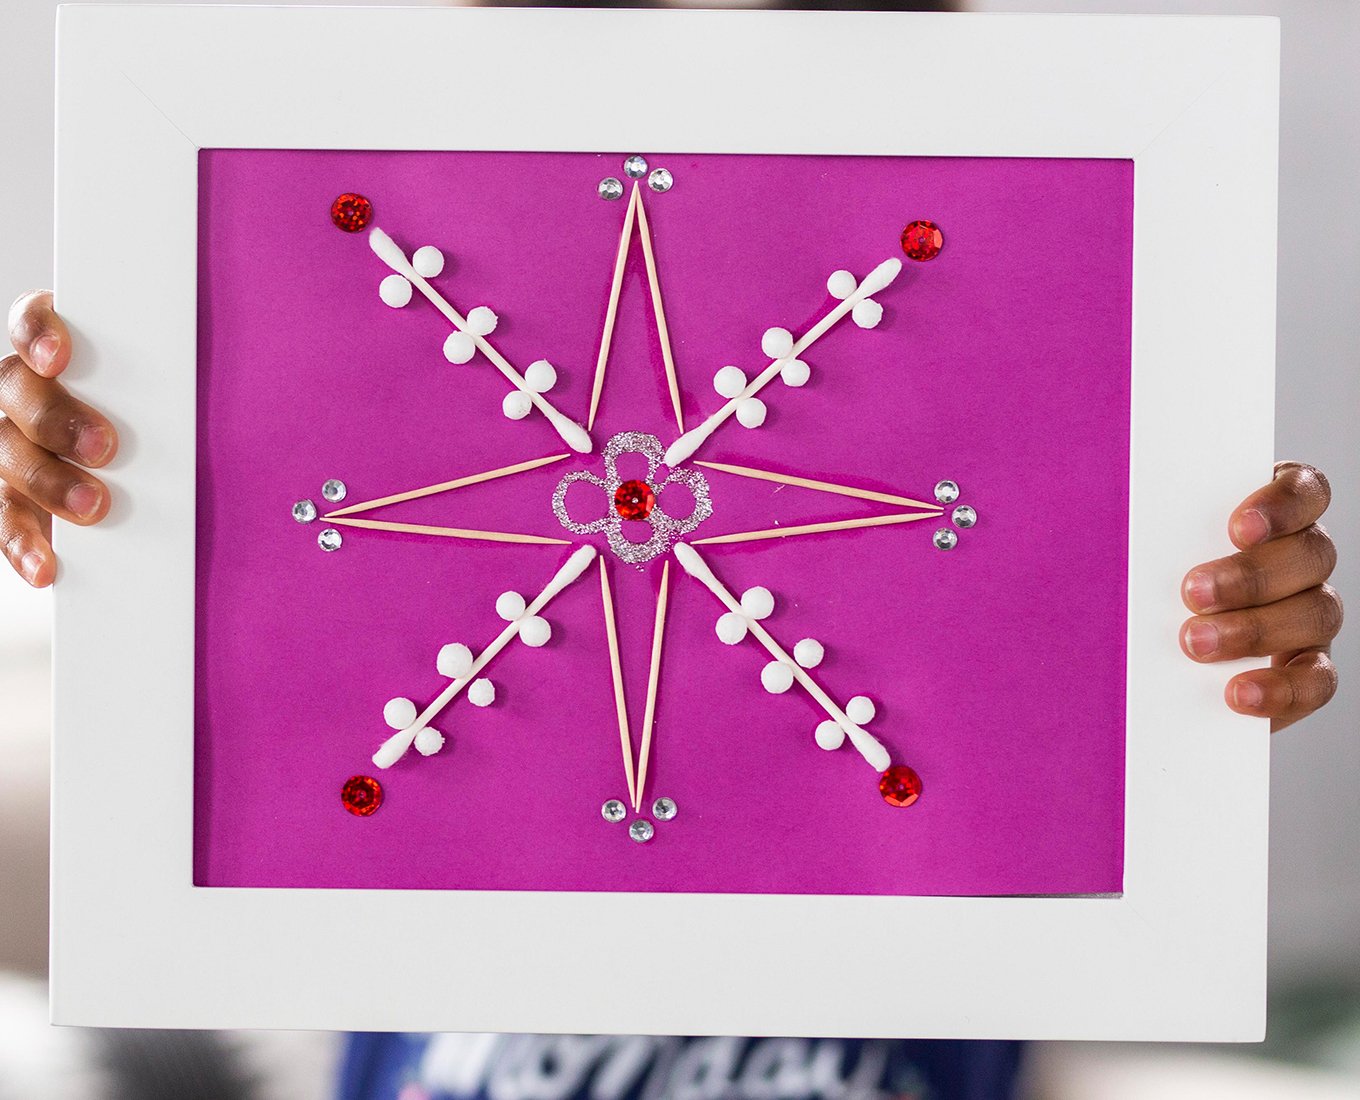 snowflake tinker art project at home activity